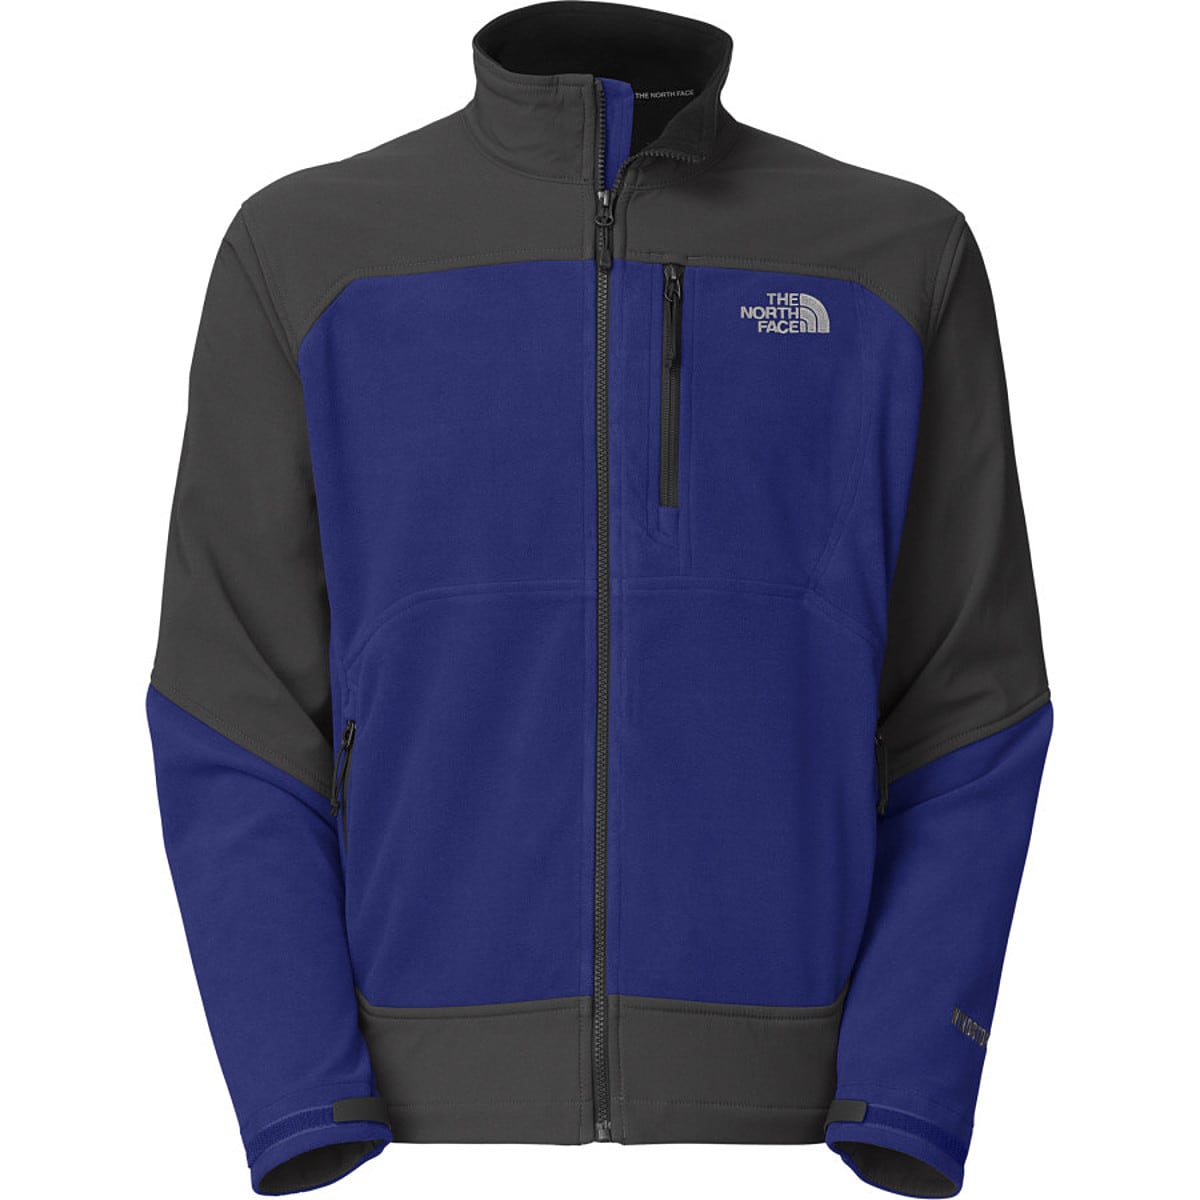 The North Face Pamir Windstopper Jacket - Men's - Clothing